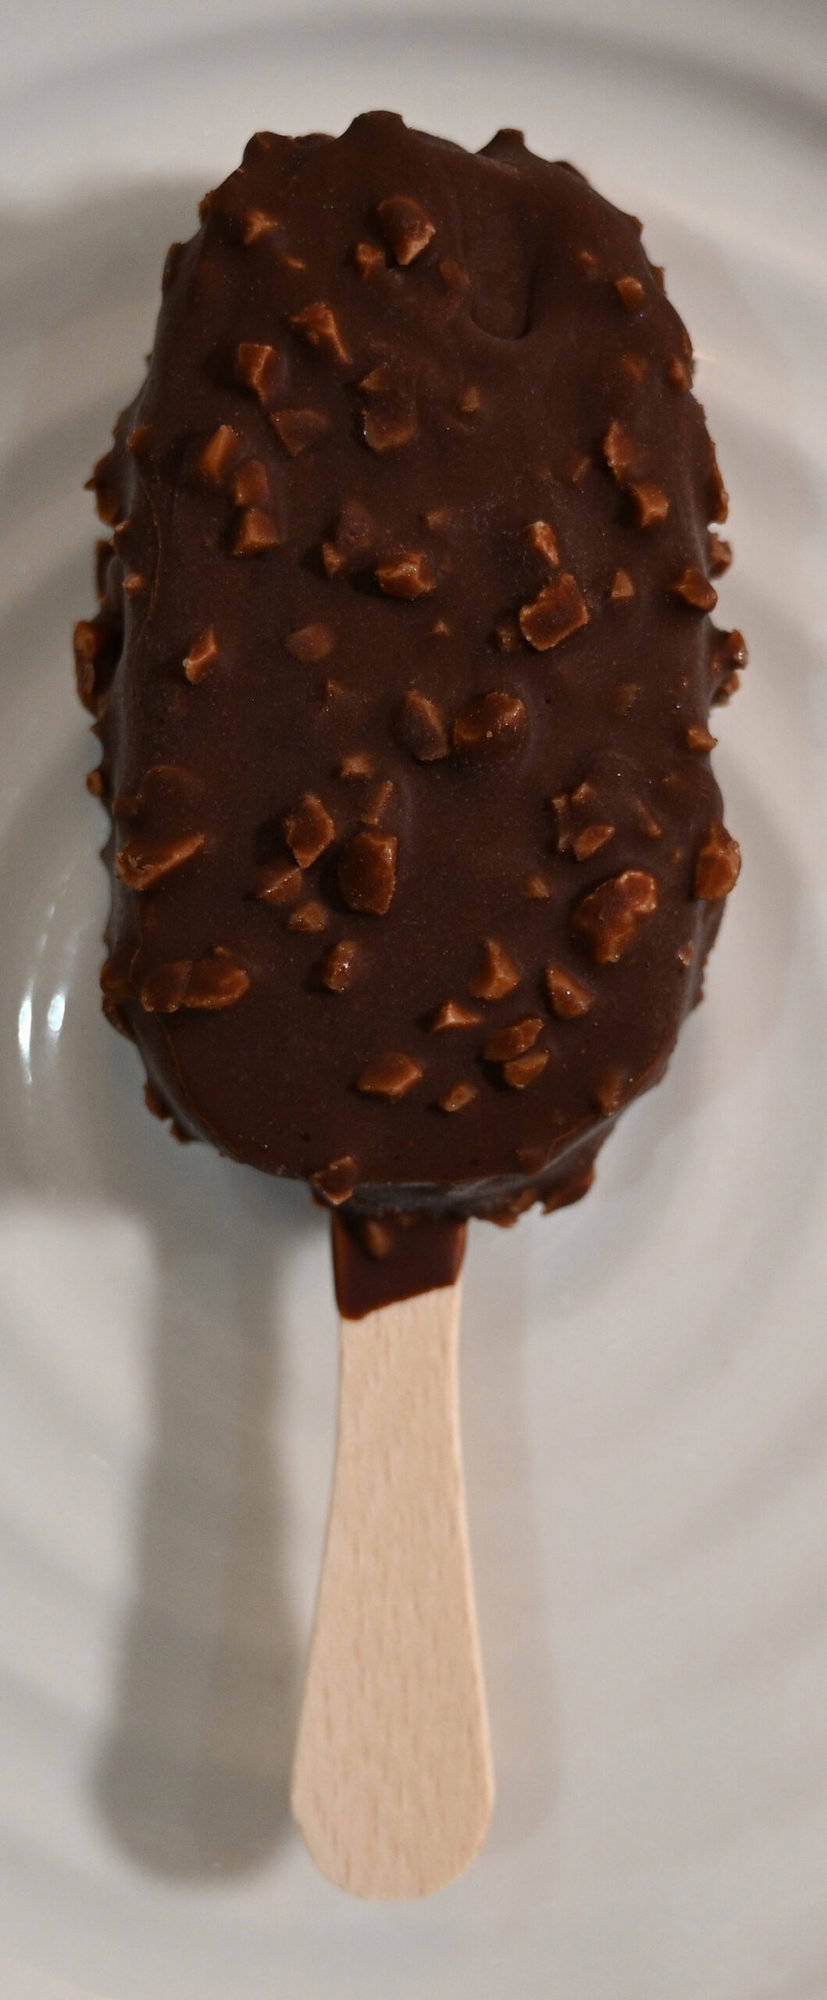 Very close image of one ice cream bar sitting on a plate unwrapped.